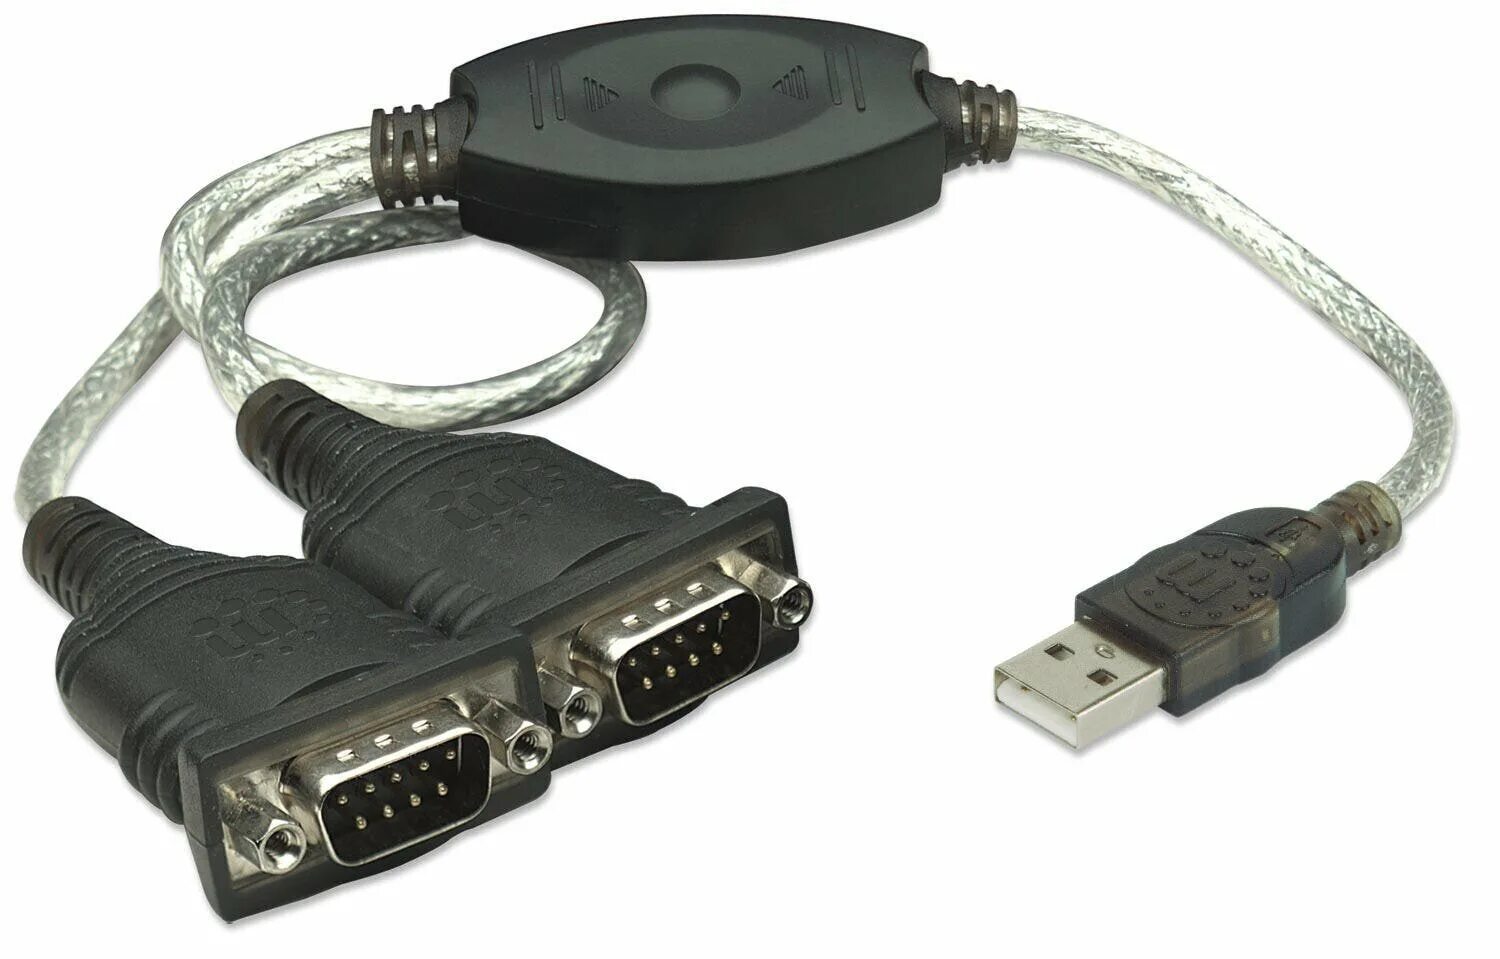 Series x 2. Converter USB to Serial Port rs232. Драйвер для USB to rs232 Cable. Db9 9pin 1 to2 rs232. USB Dual rs232 драйвер.